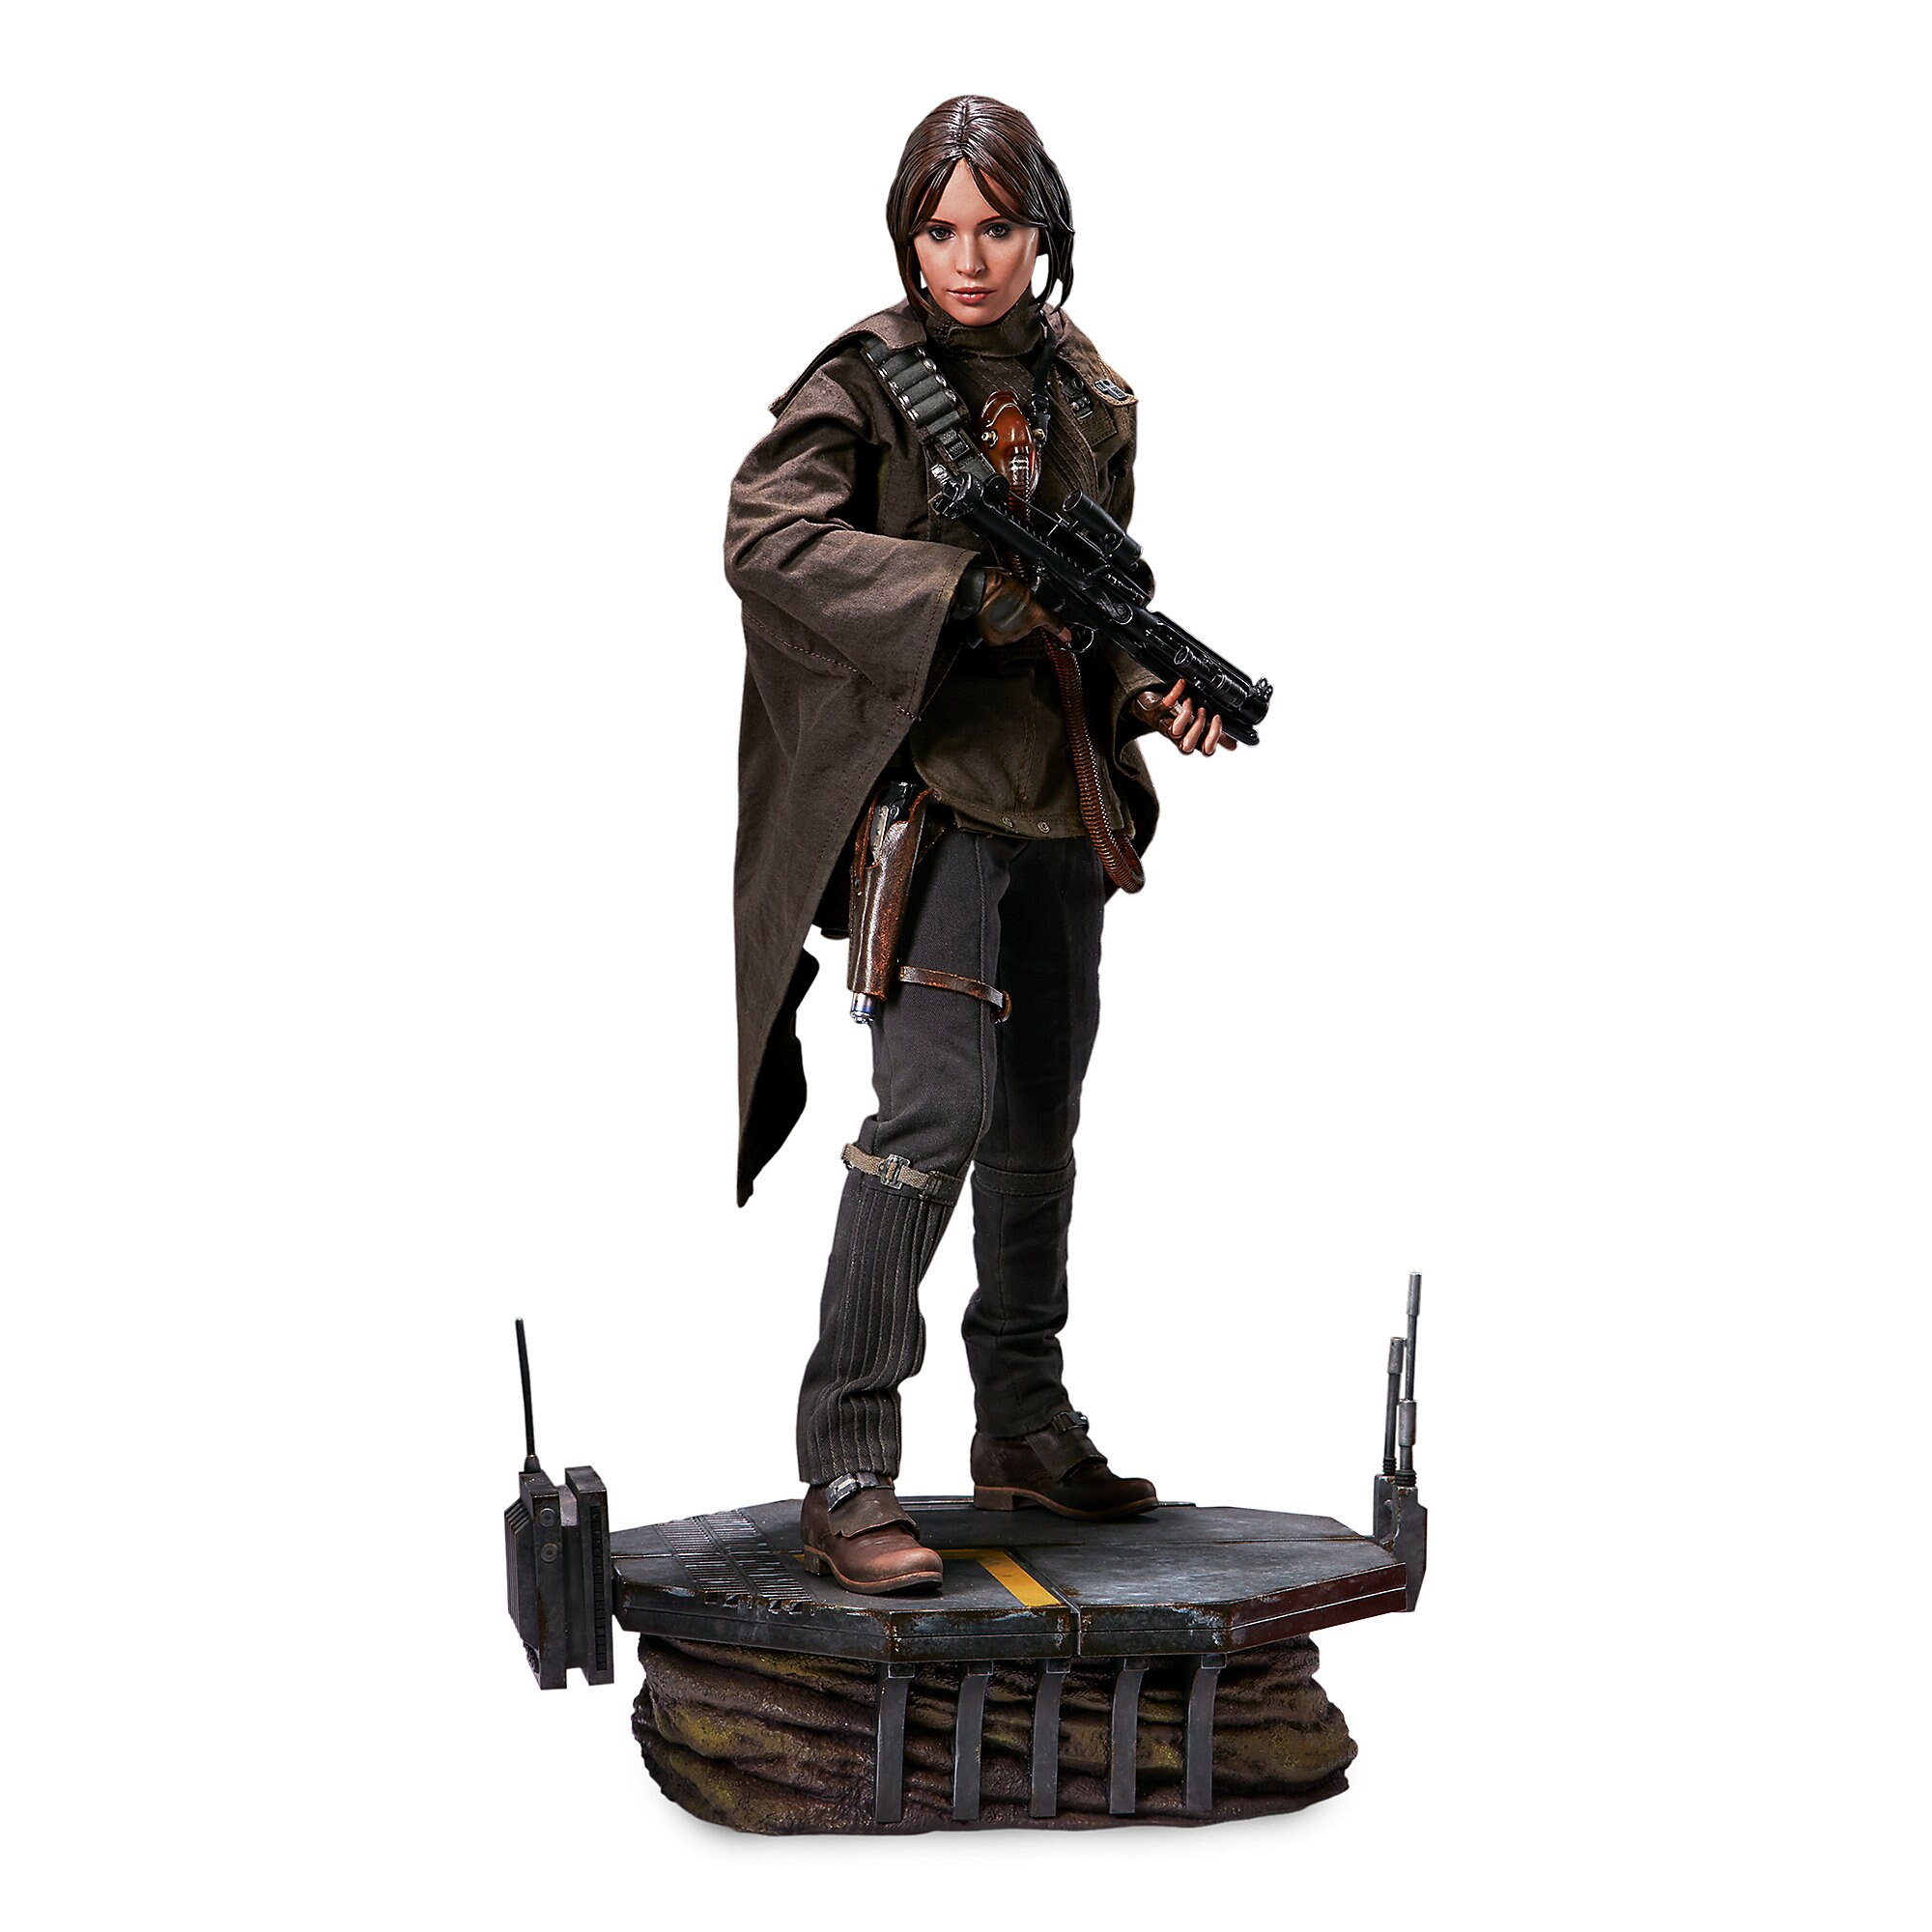 Jyn Erso Premium Format Figure by Sideshow Collectibles - Limited Edition